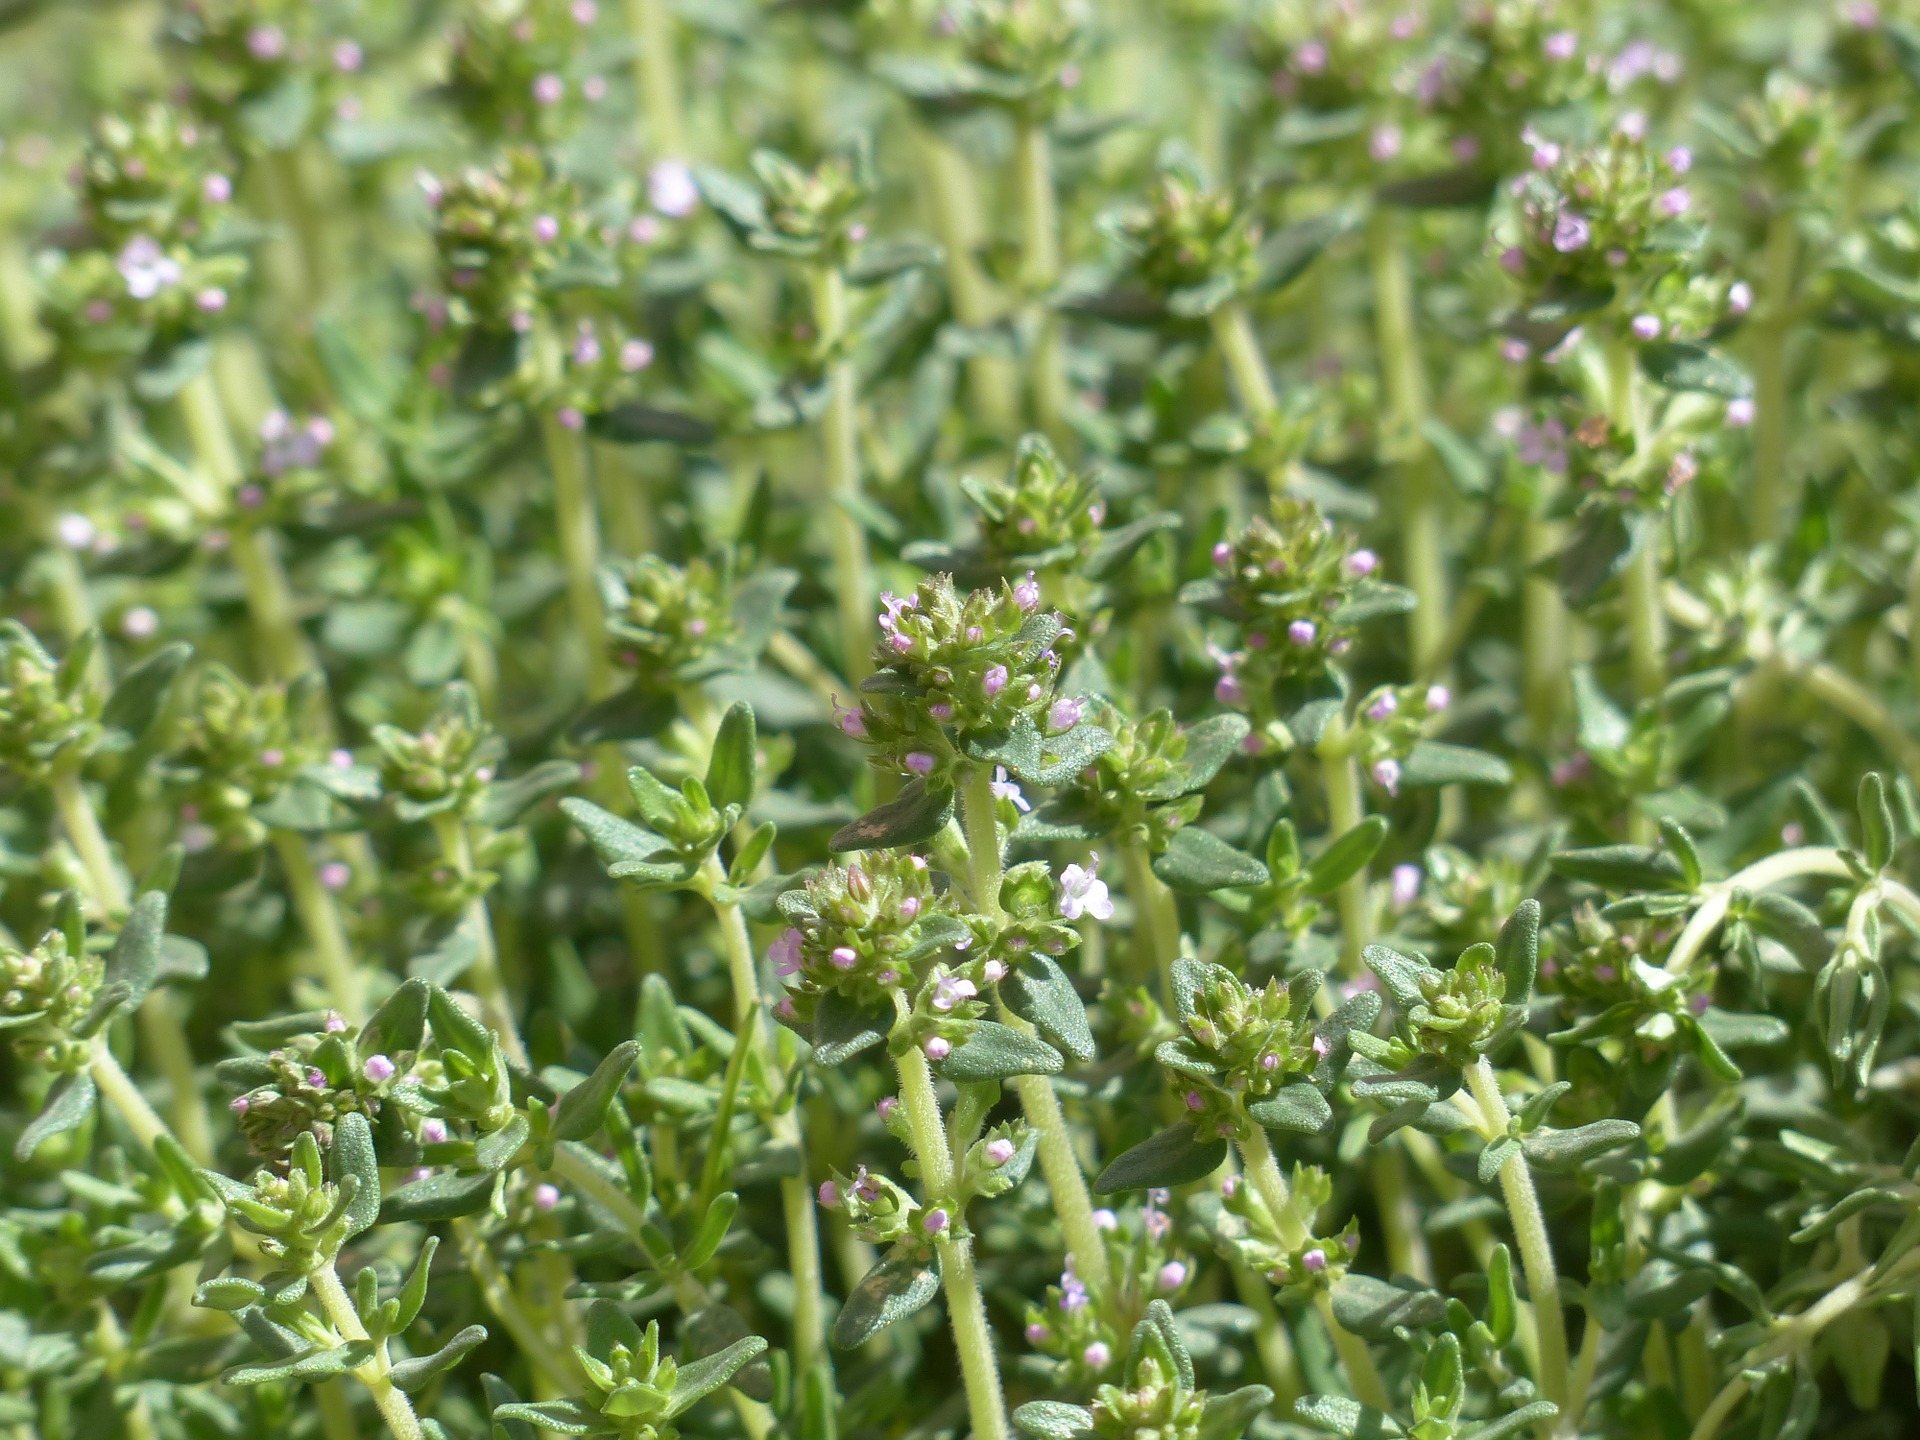 FIND OUT MORE ABOUT THYME